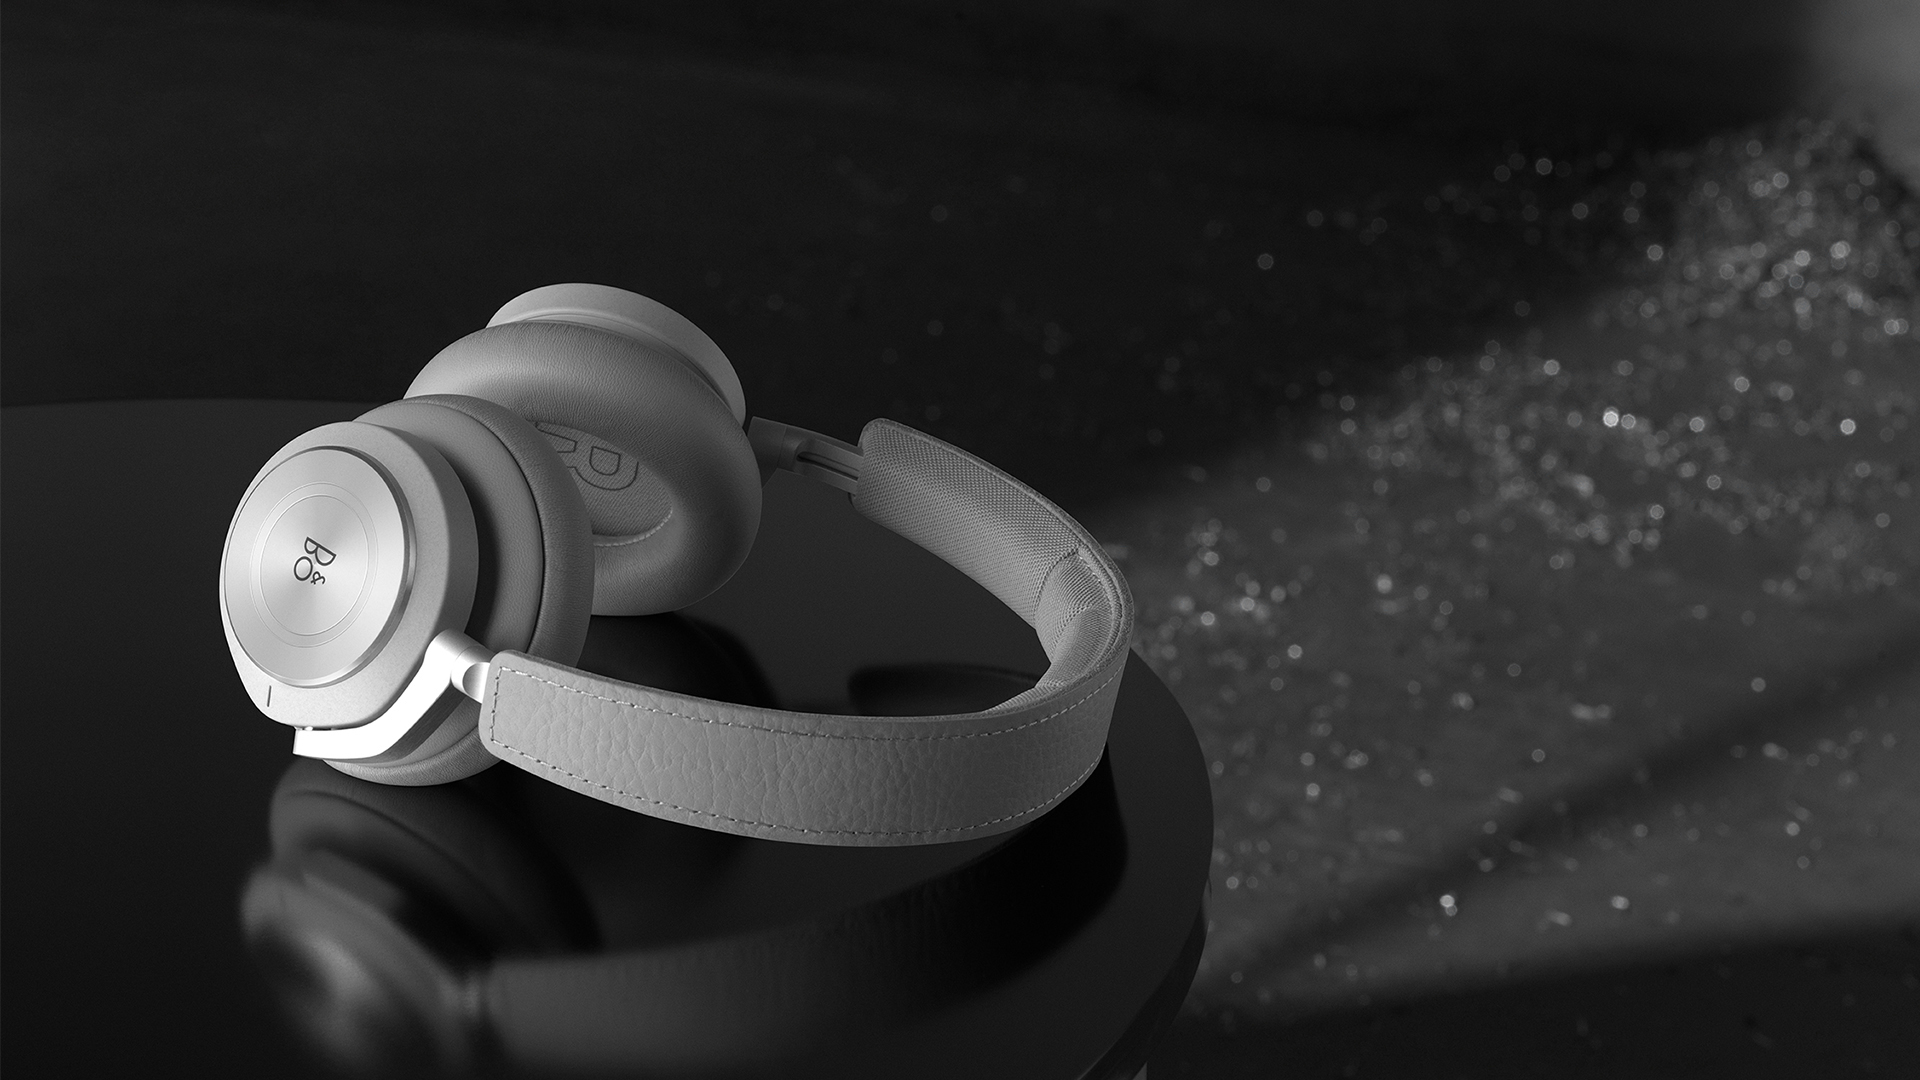 Bang Olufsen High End Headphones Speakers And Televisions - ch#U00e2teau de sannois roblox